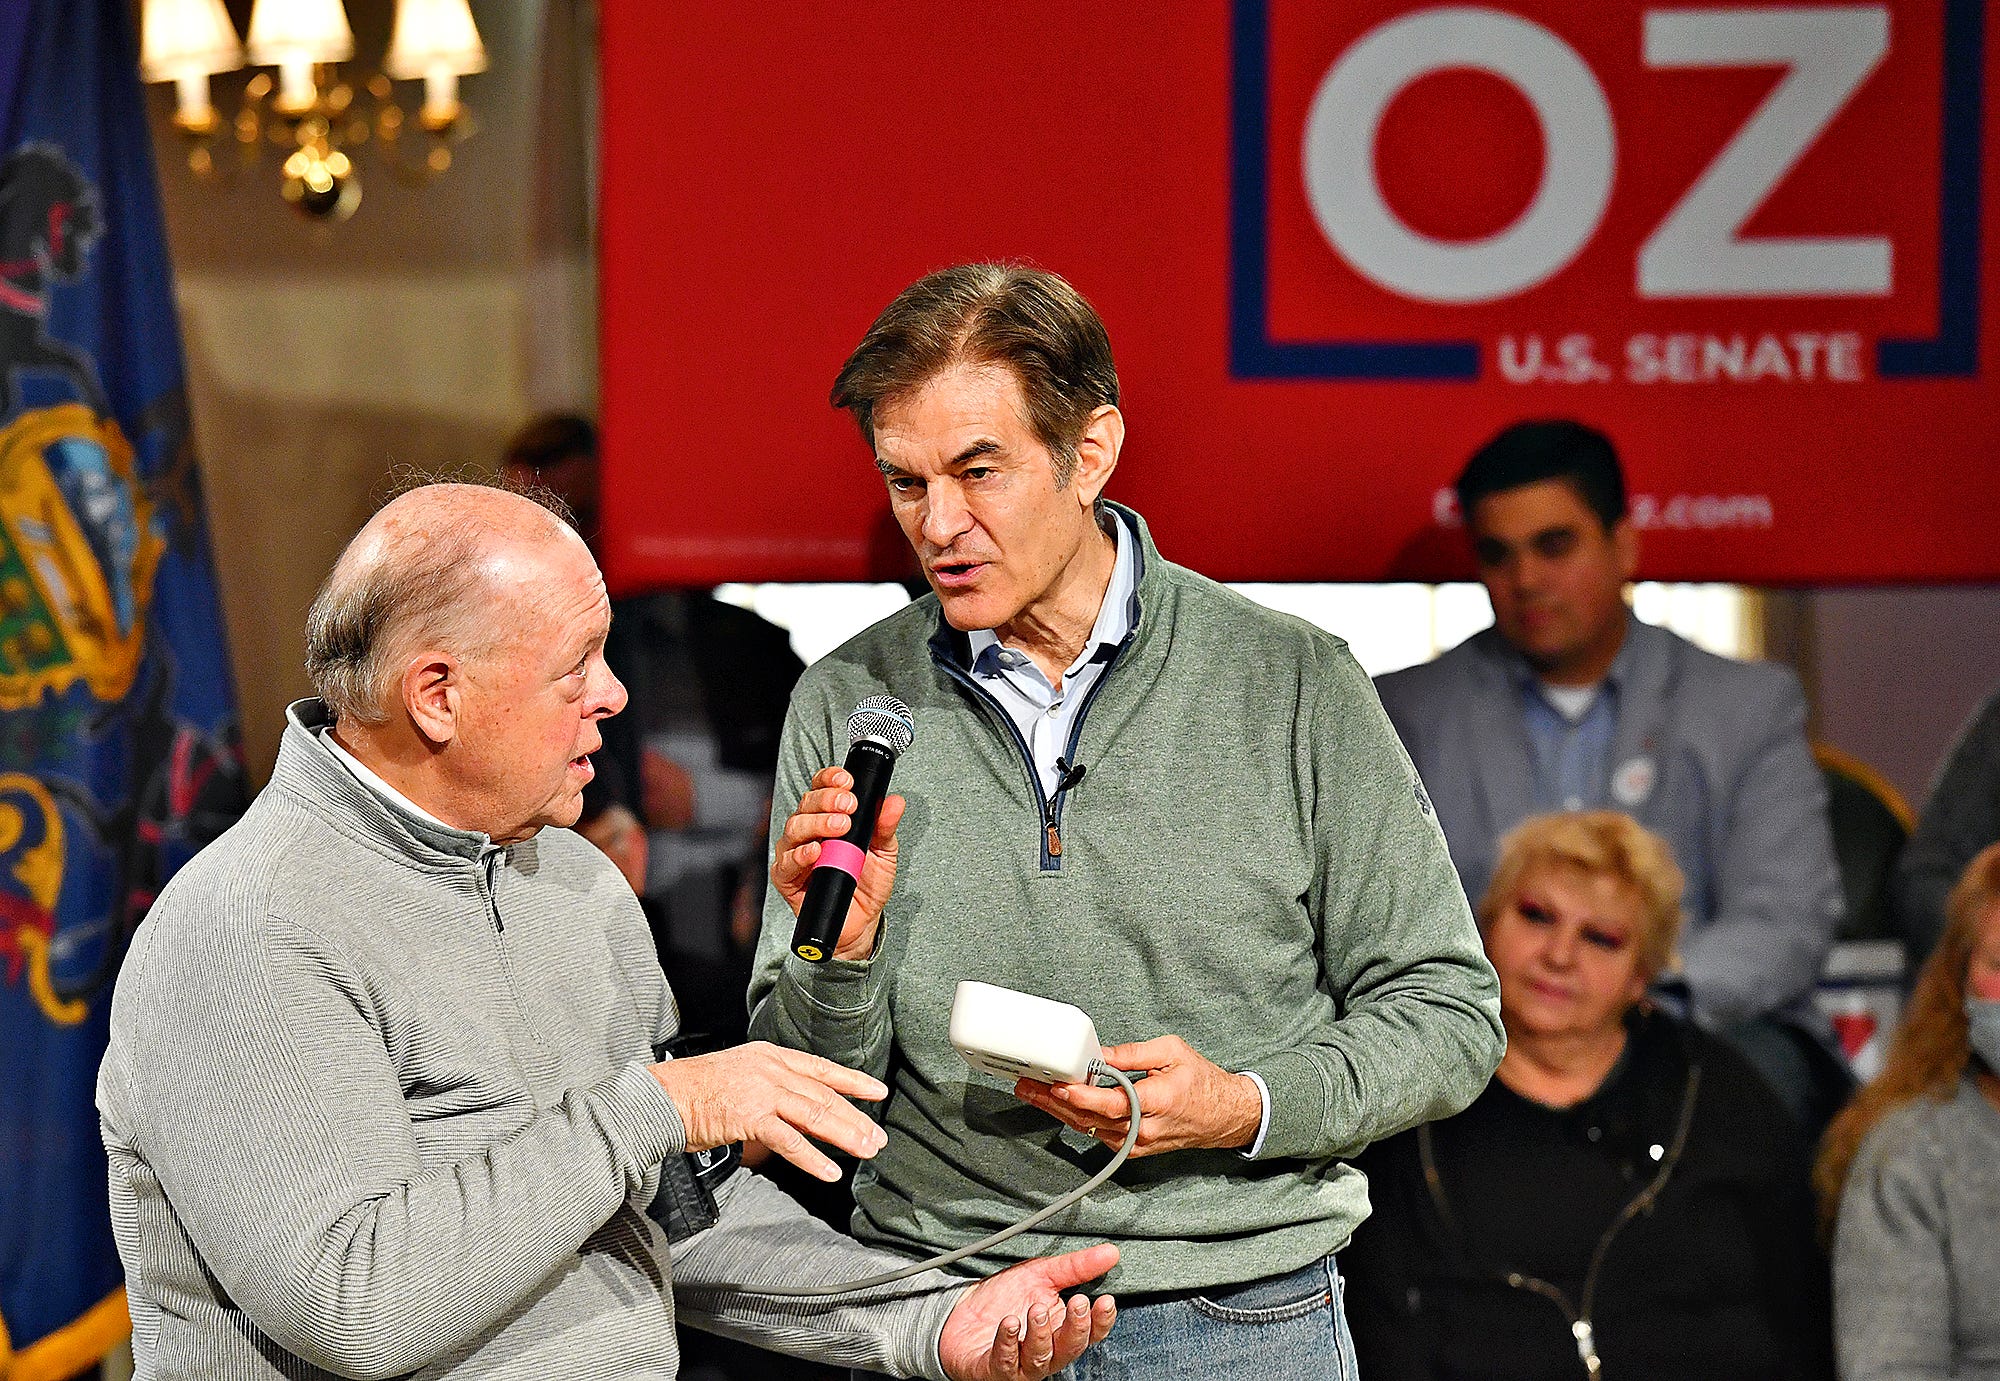 Dr. Mehmet Oz, right, and Gary Sutton, of WSBA Morning News, during the fourth stop along the Doctor Oz for Senate campaign trail, at Wisehaven Event Center in Windsor Township, Saturday, Feb. 5, 2022. Dawn J. Sagert photo